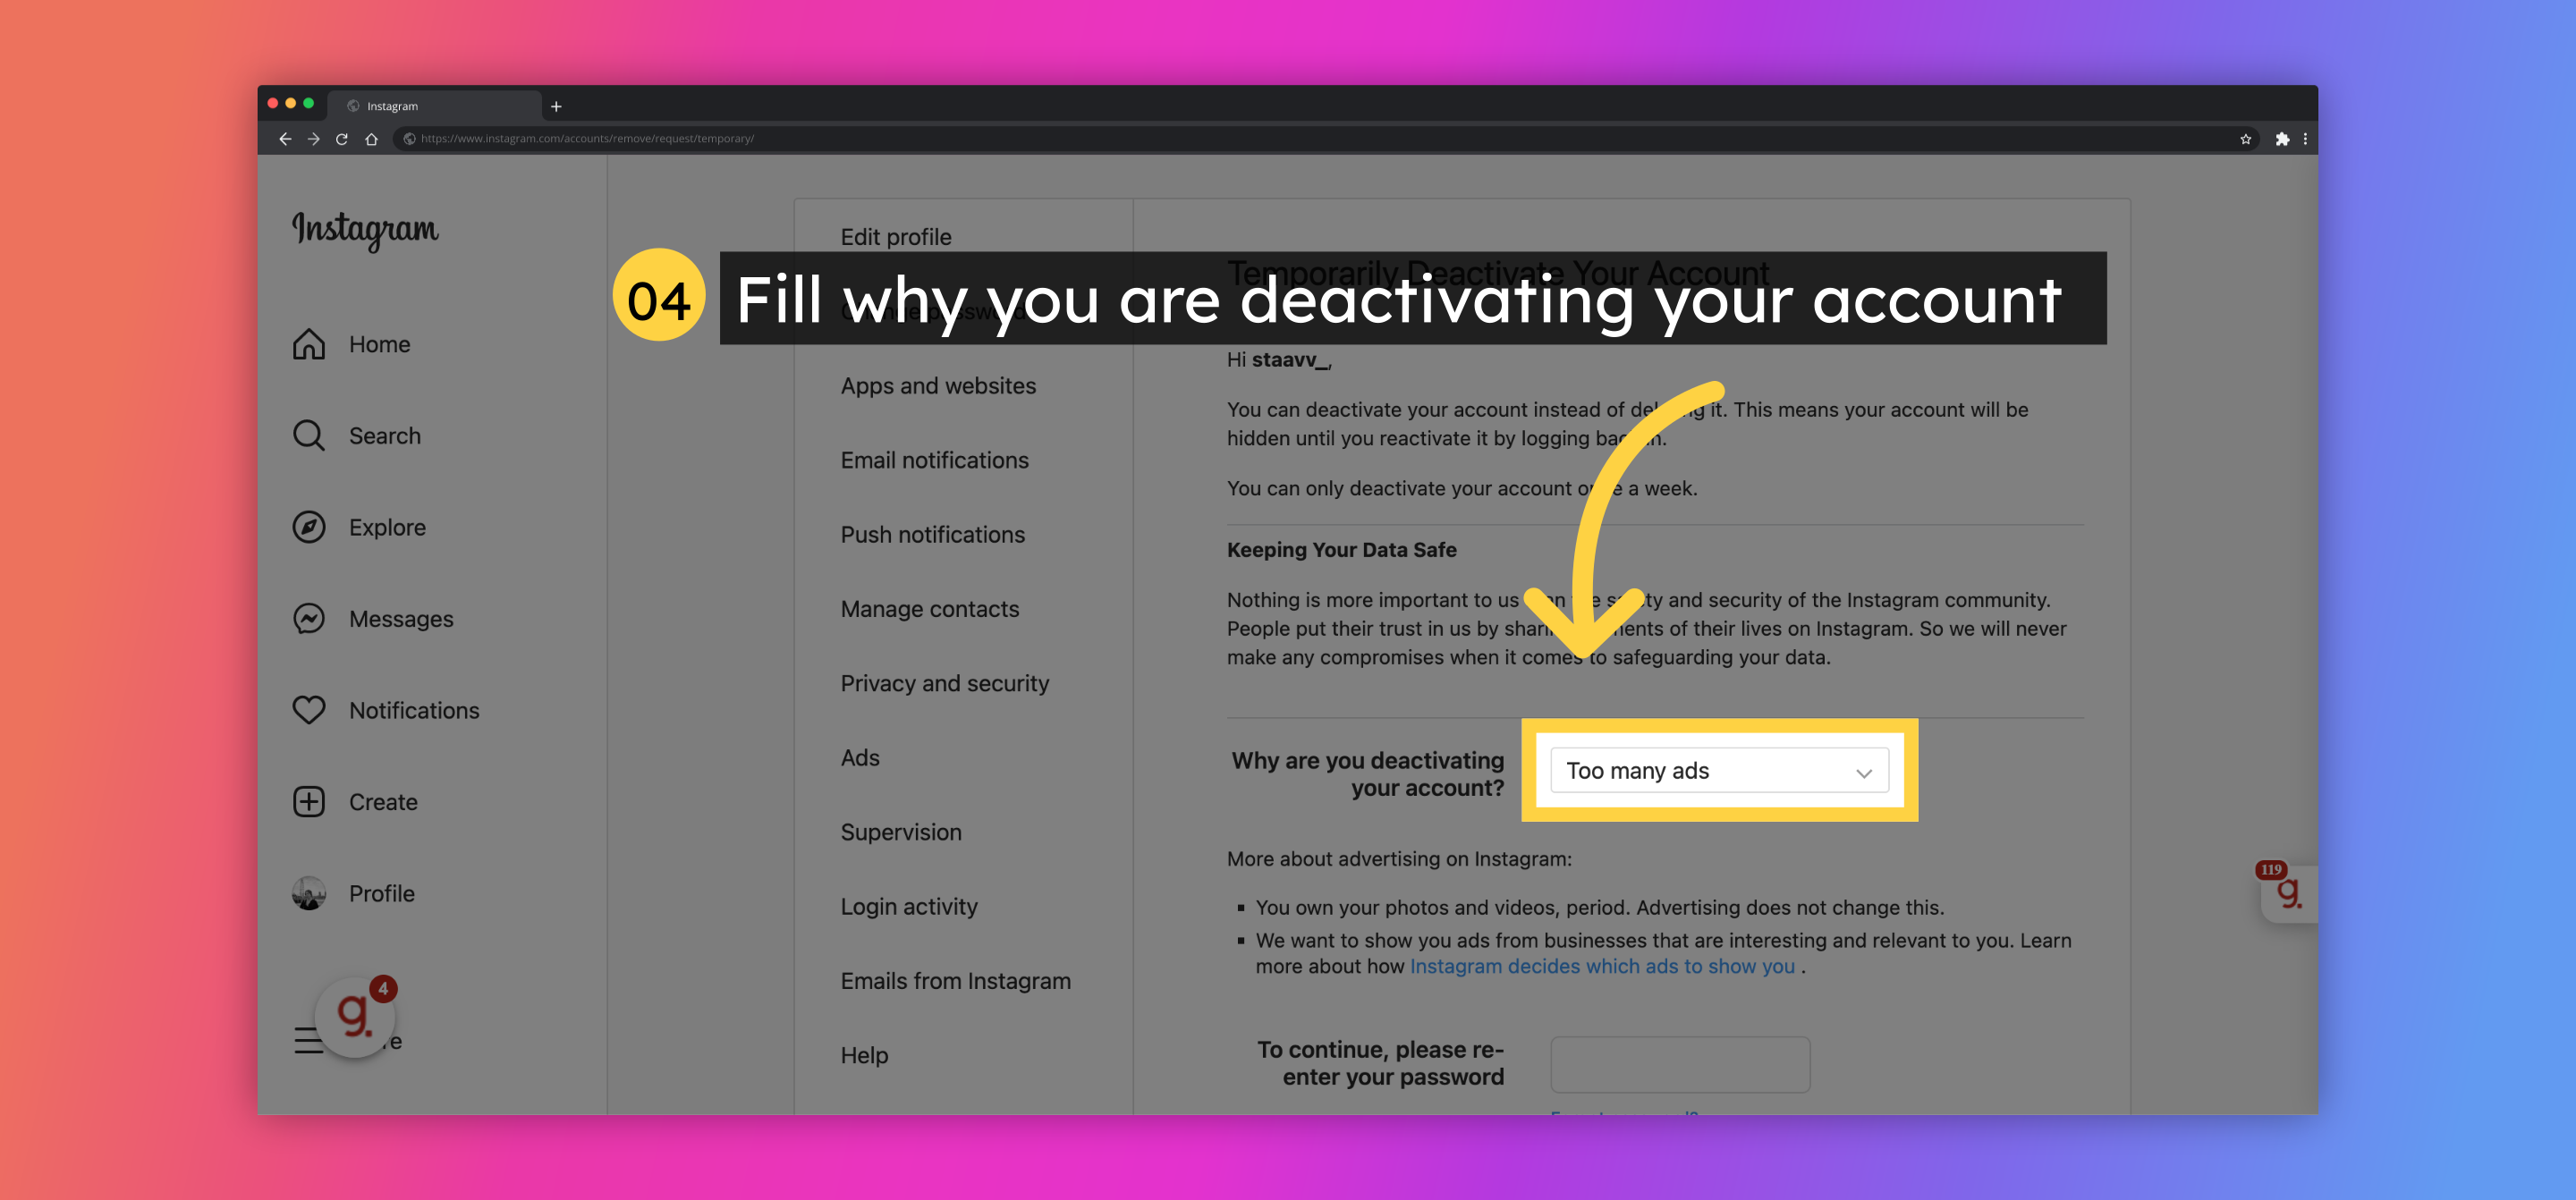 Fill why you are deactivating your account